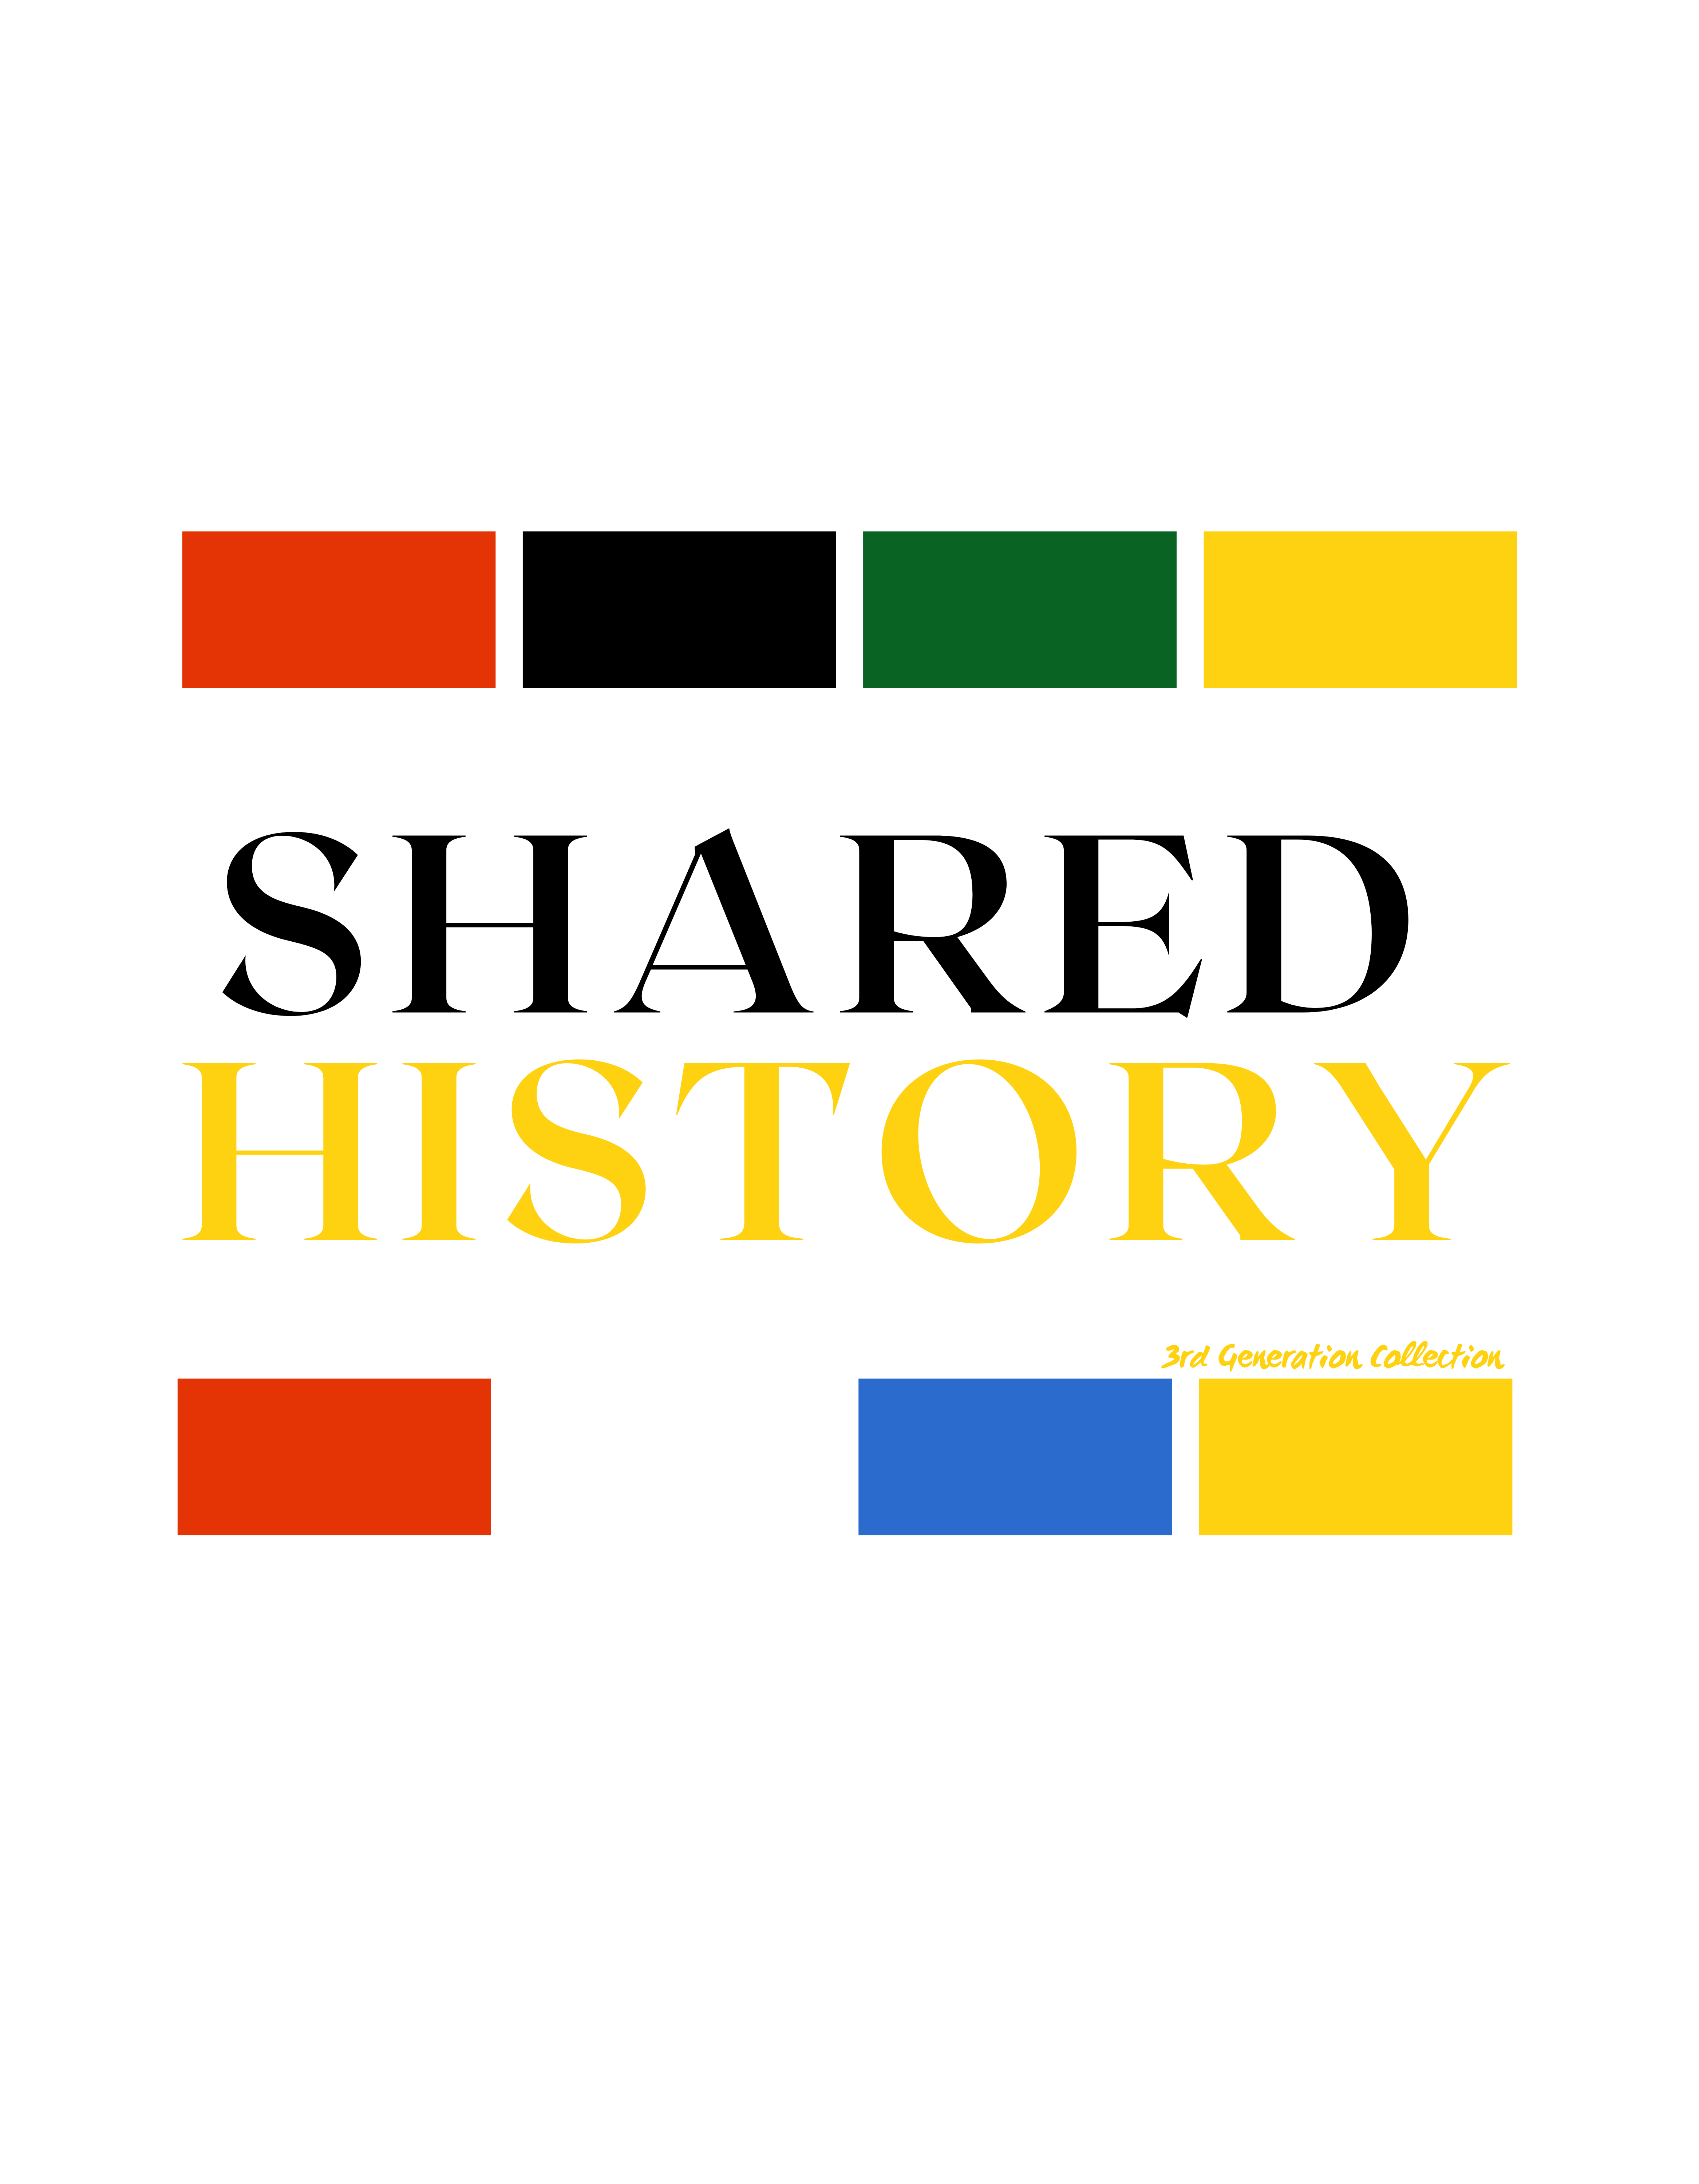 Colourful_shared history